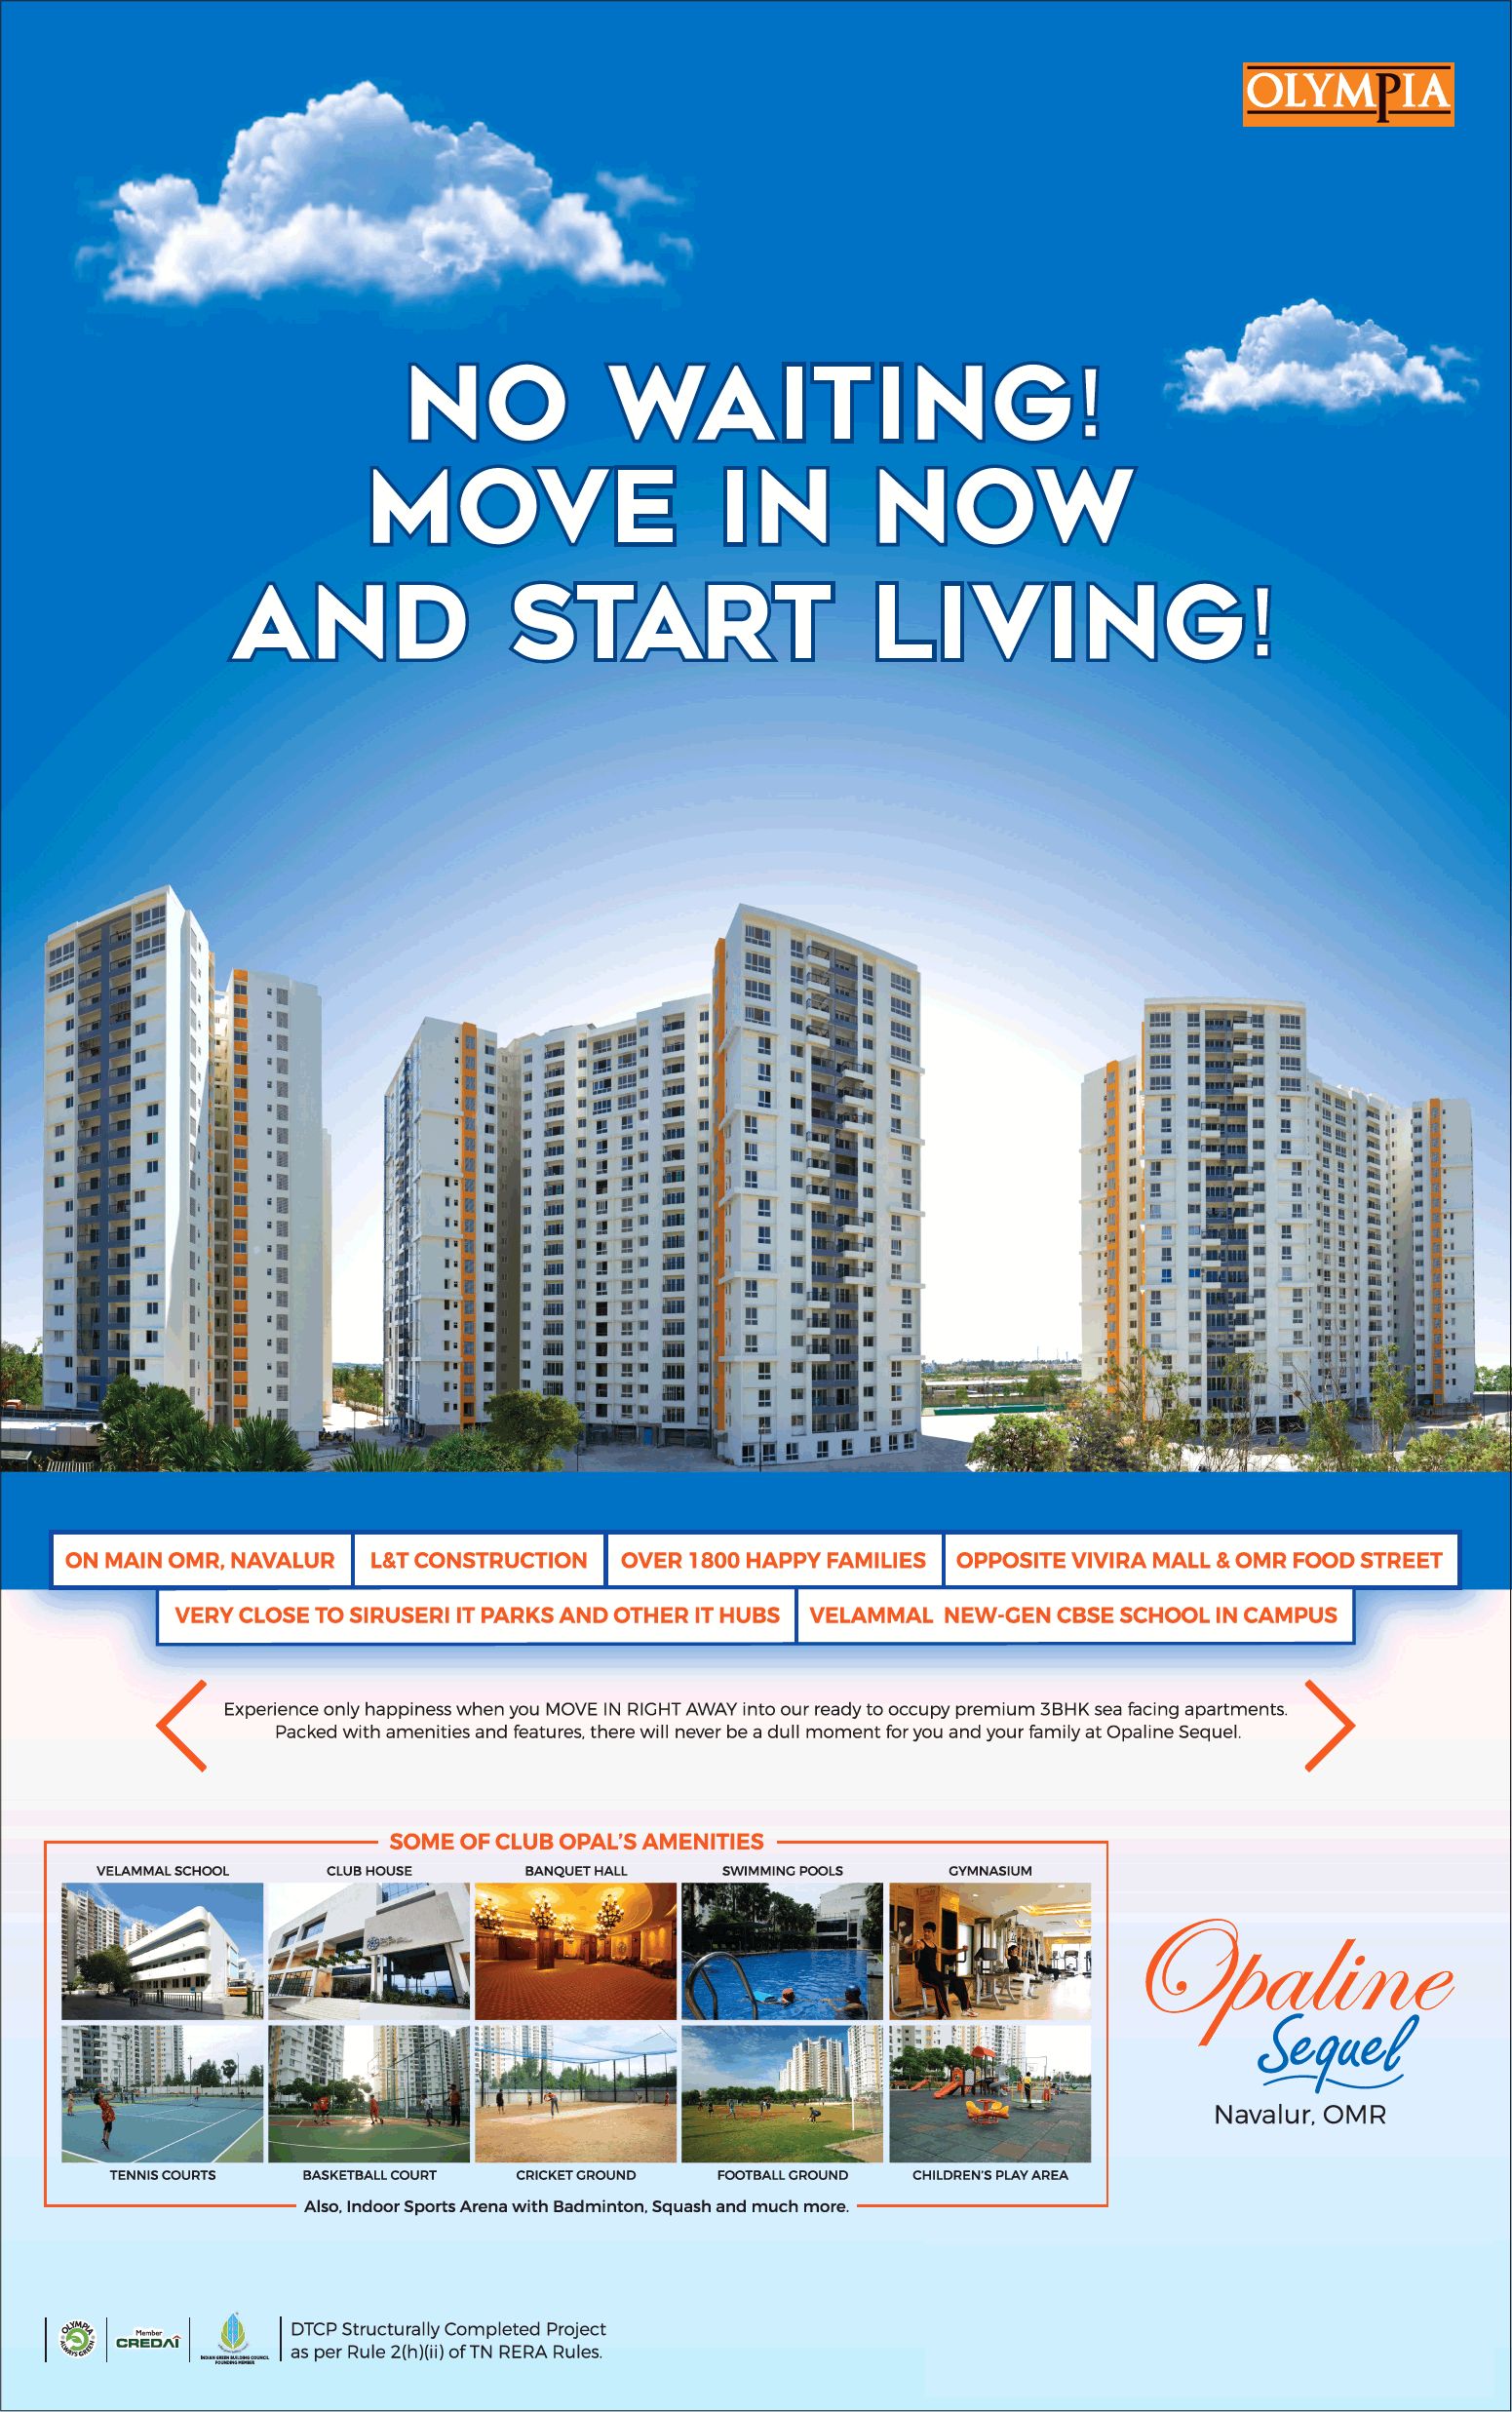 No waiting move in now and start living at Olympia Opaline Sequel in Chennai Update